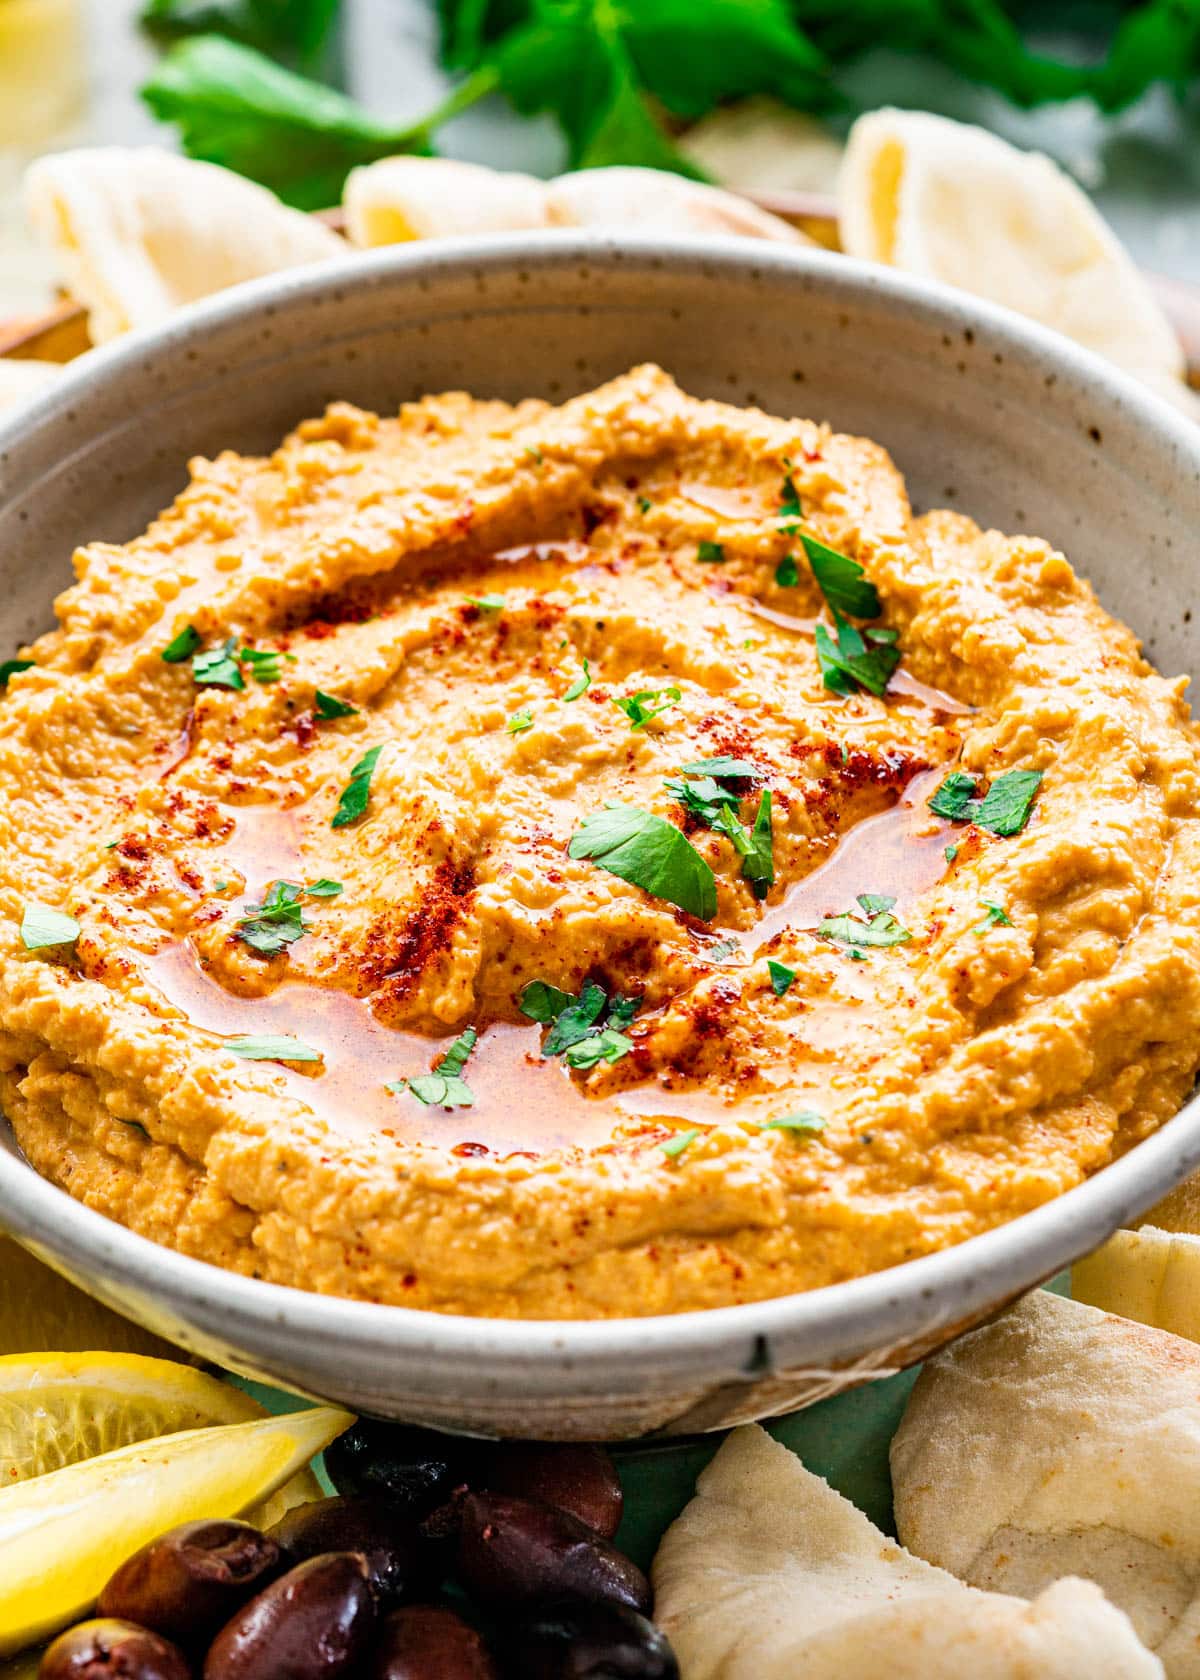 hummus in a bowl garnished with parsley and olive oil